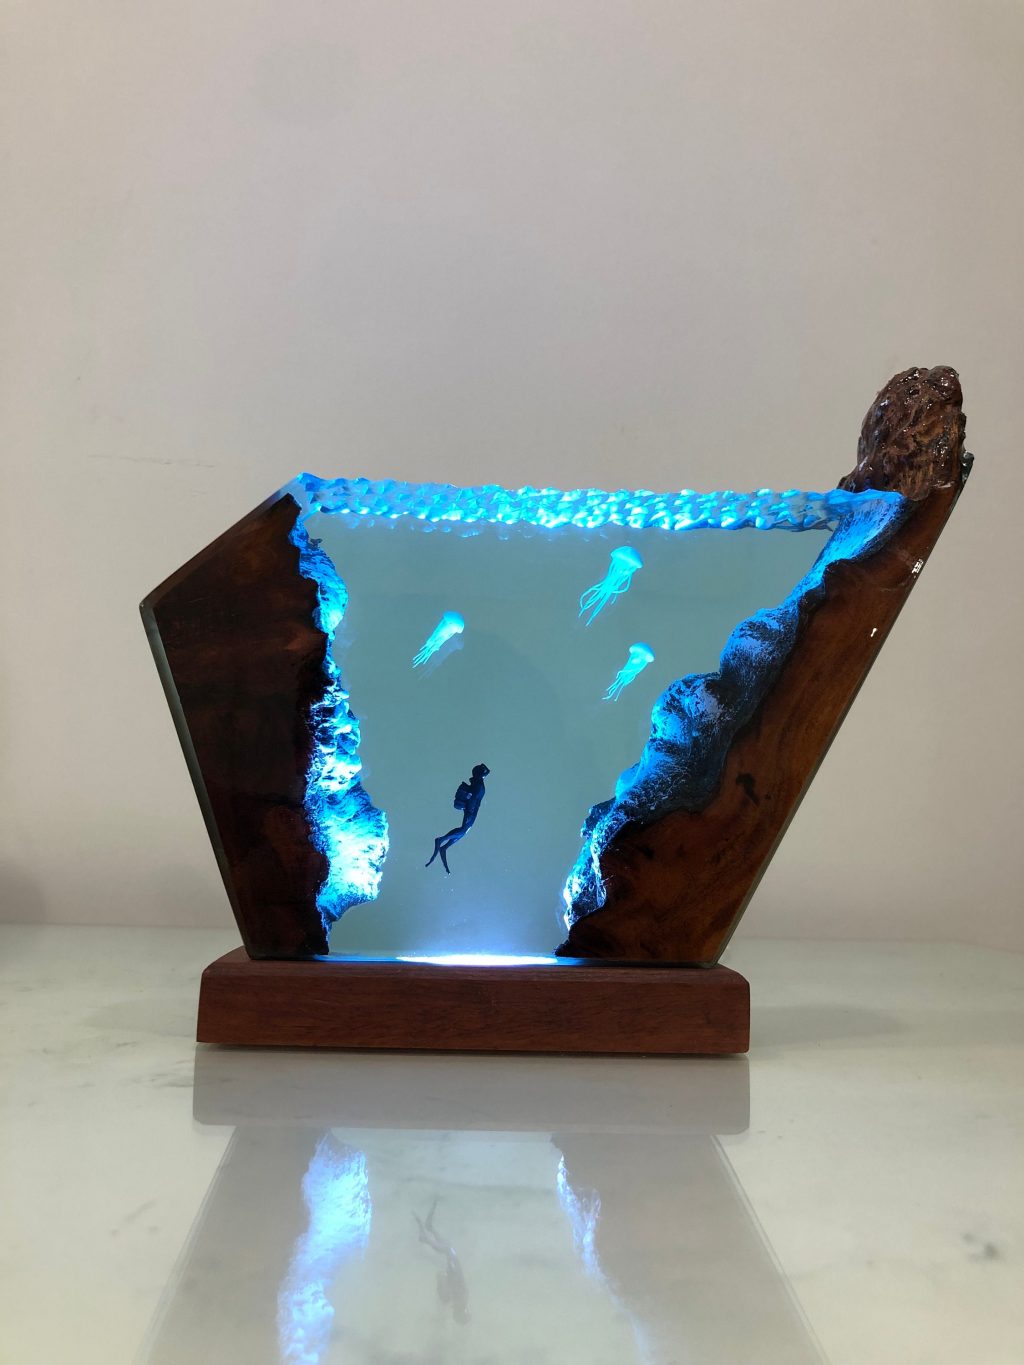 Jellyfish and Diver Epoxy Resin Wood Night light- Ocean Art Epoxy Resin- Home decor unique gift- Christmas Gift for your Love